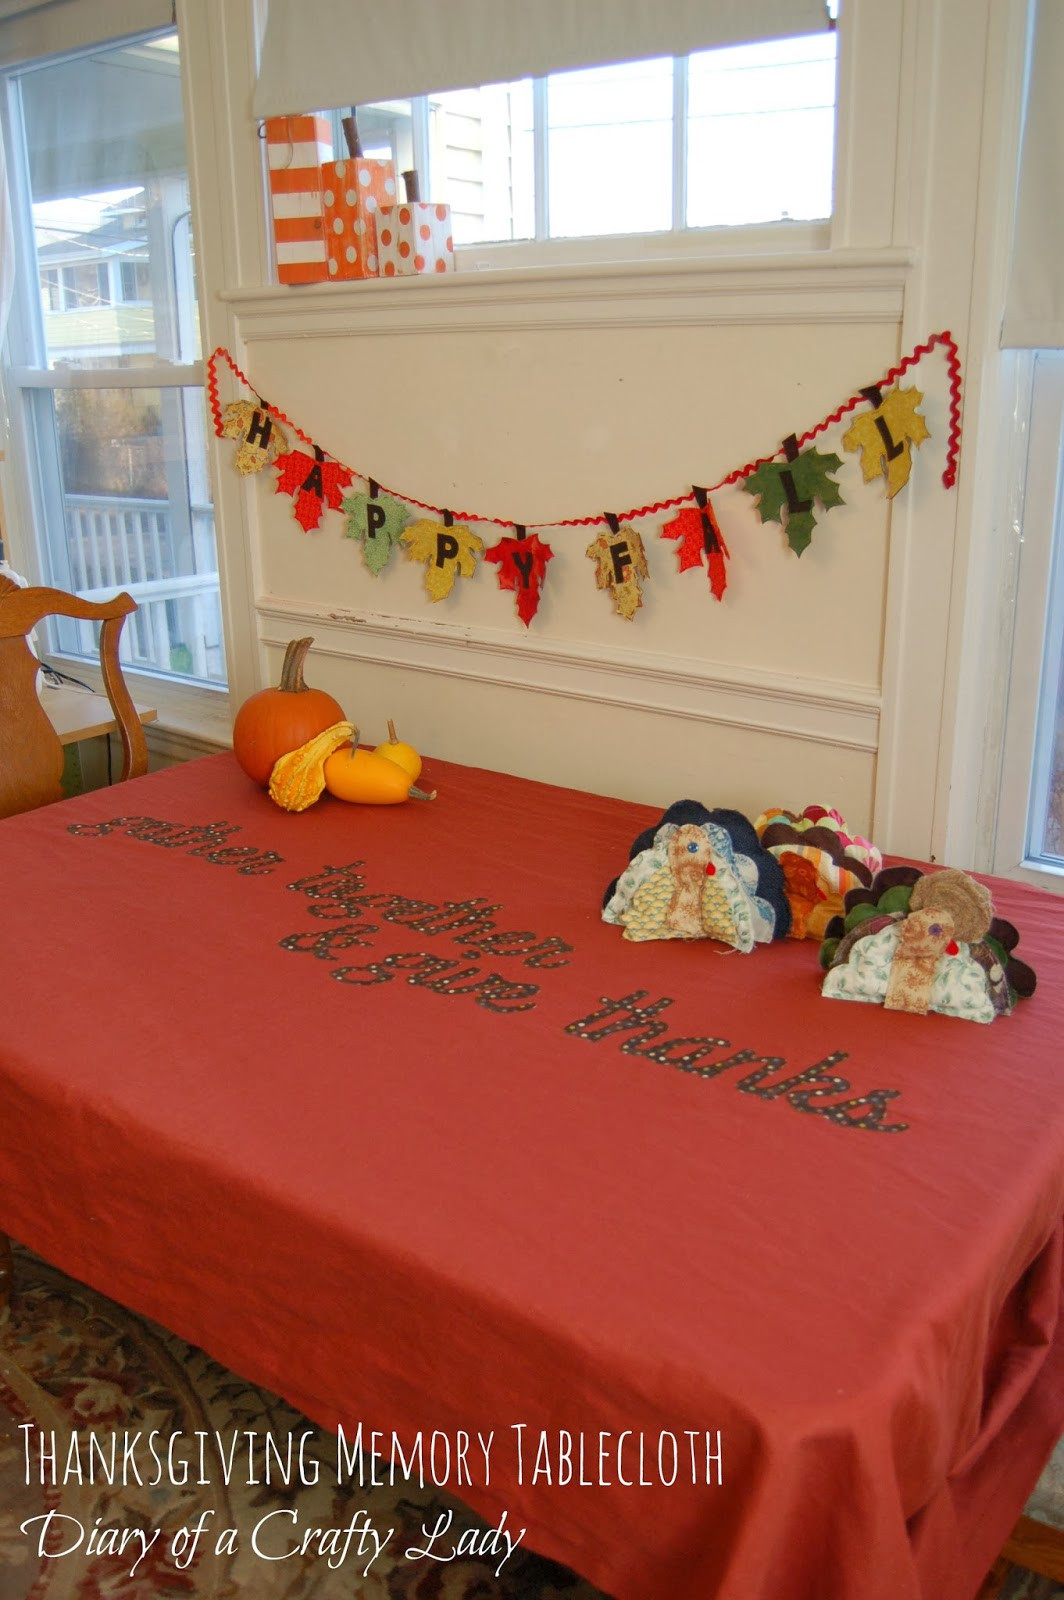 Thanksgiving Table Cloth
 Diary of a Crafty Lady Thanksgiving Memory Tablecloth